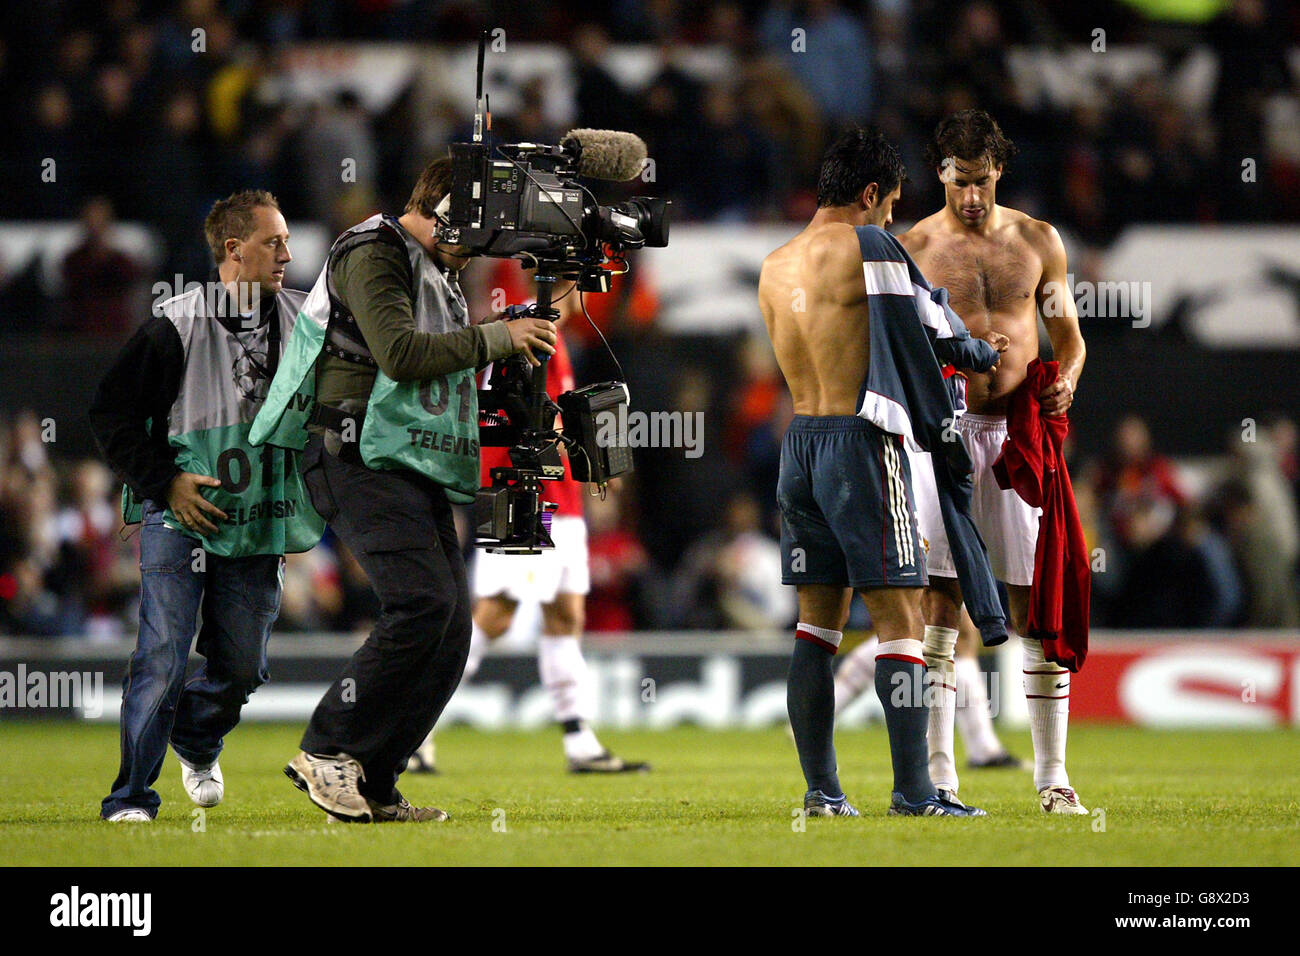 Soccer - UEFA Champions League - Group D - Manchester United v Benfica - Old Trafford. Manchester United's Ruud van Nistelrooy swaps shirts with Benfica's Ricardo Rocha Stock Photo